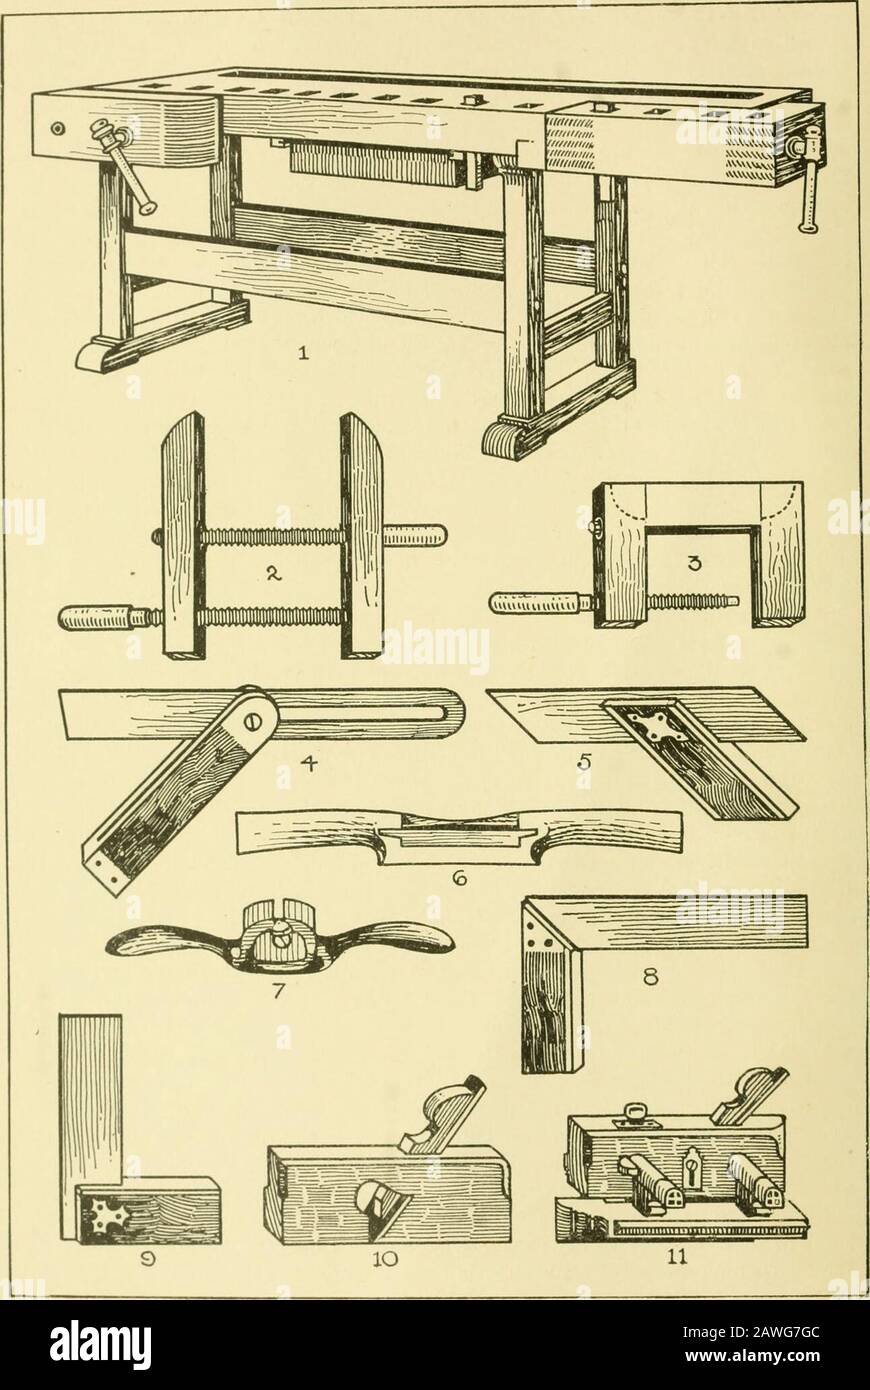 Modern cabinet work, furniture & fitments; an account of the theory & practice in the production of all kinds of cabinet work & furniture with chapters on the growth and progress of design and construction; illustrated by over 1000 practical workshop drawings, photographs & original designs . to 2 in. on the blade areextremely handy where a longer blade cannot be used. Oilstones are of various quality and manufacture. The Washita is agood one for all-round use, and the Turkey for a keen finished edge. Charnley Forest is a slow cutter, but is also good for finishing, and Arkansas is a first-cla Stock Photo